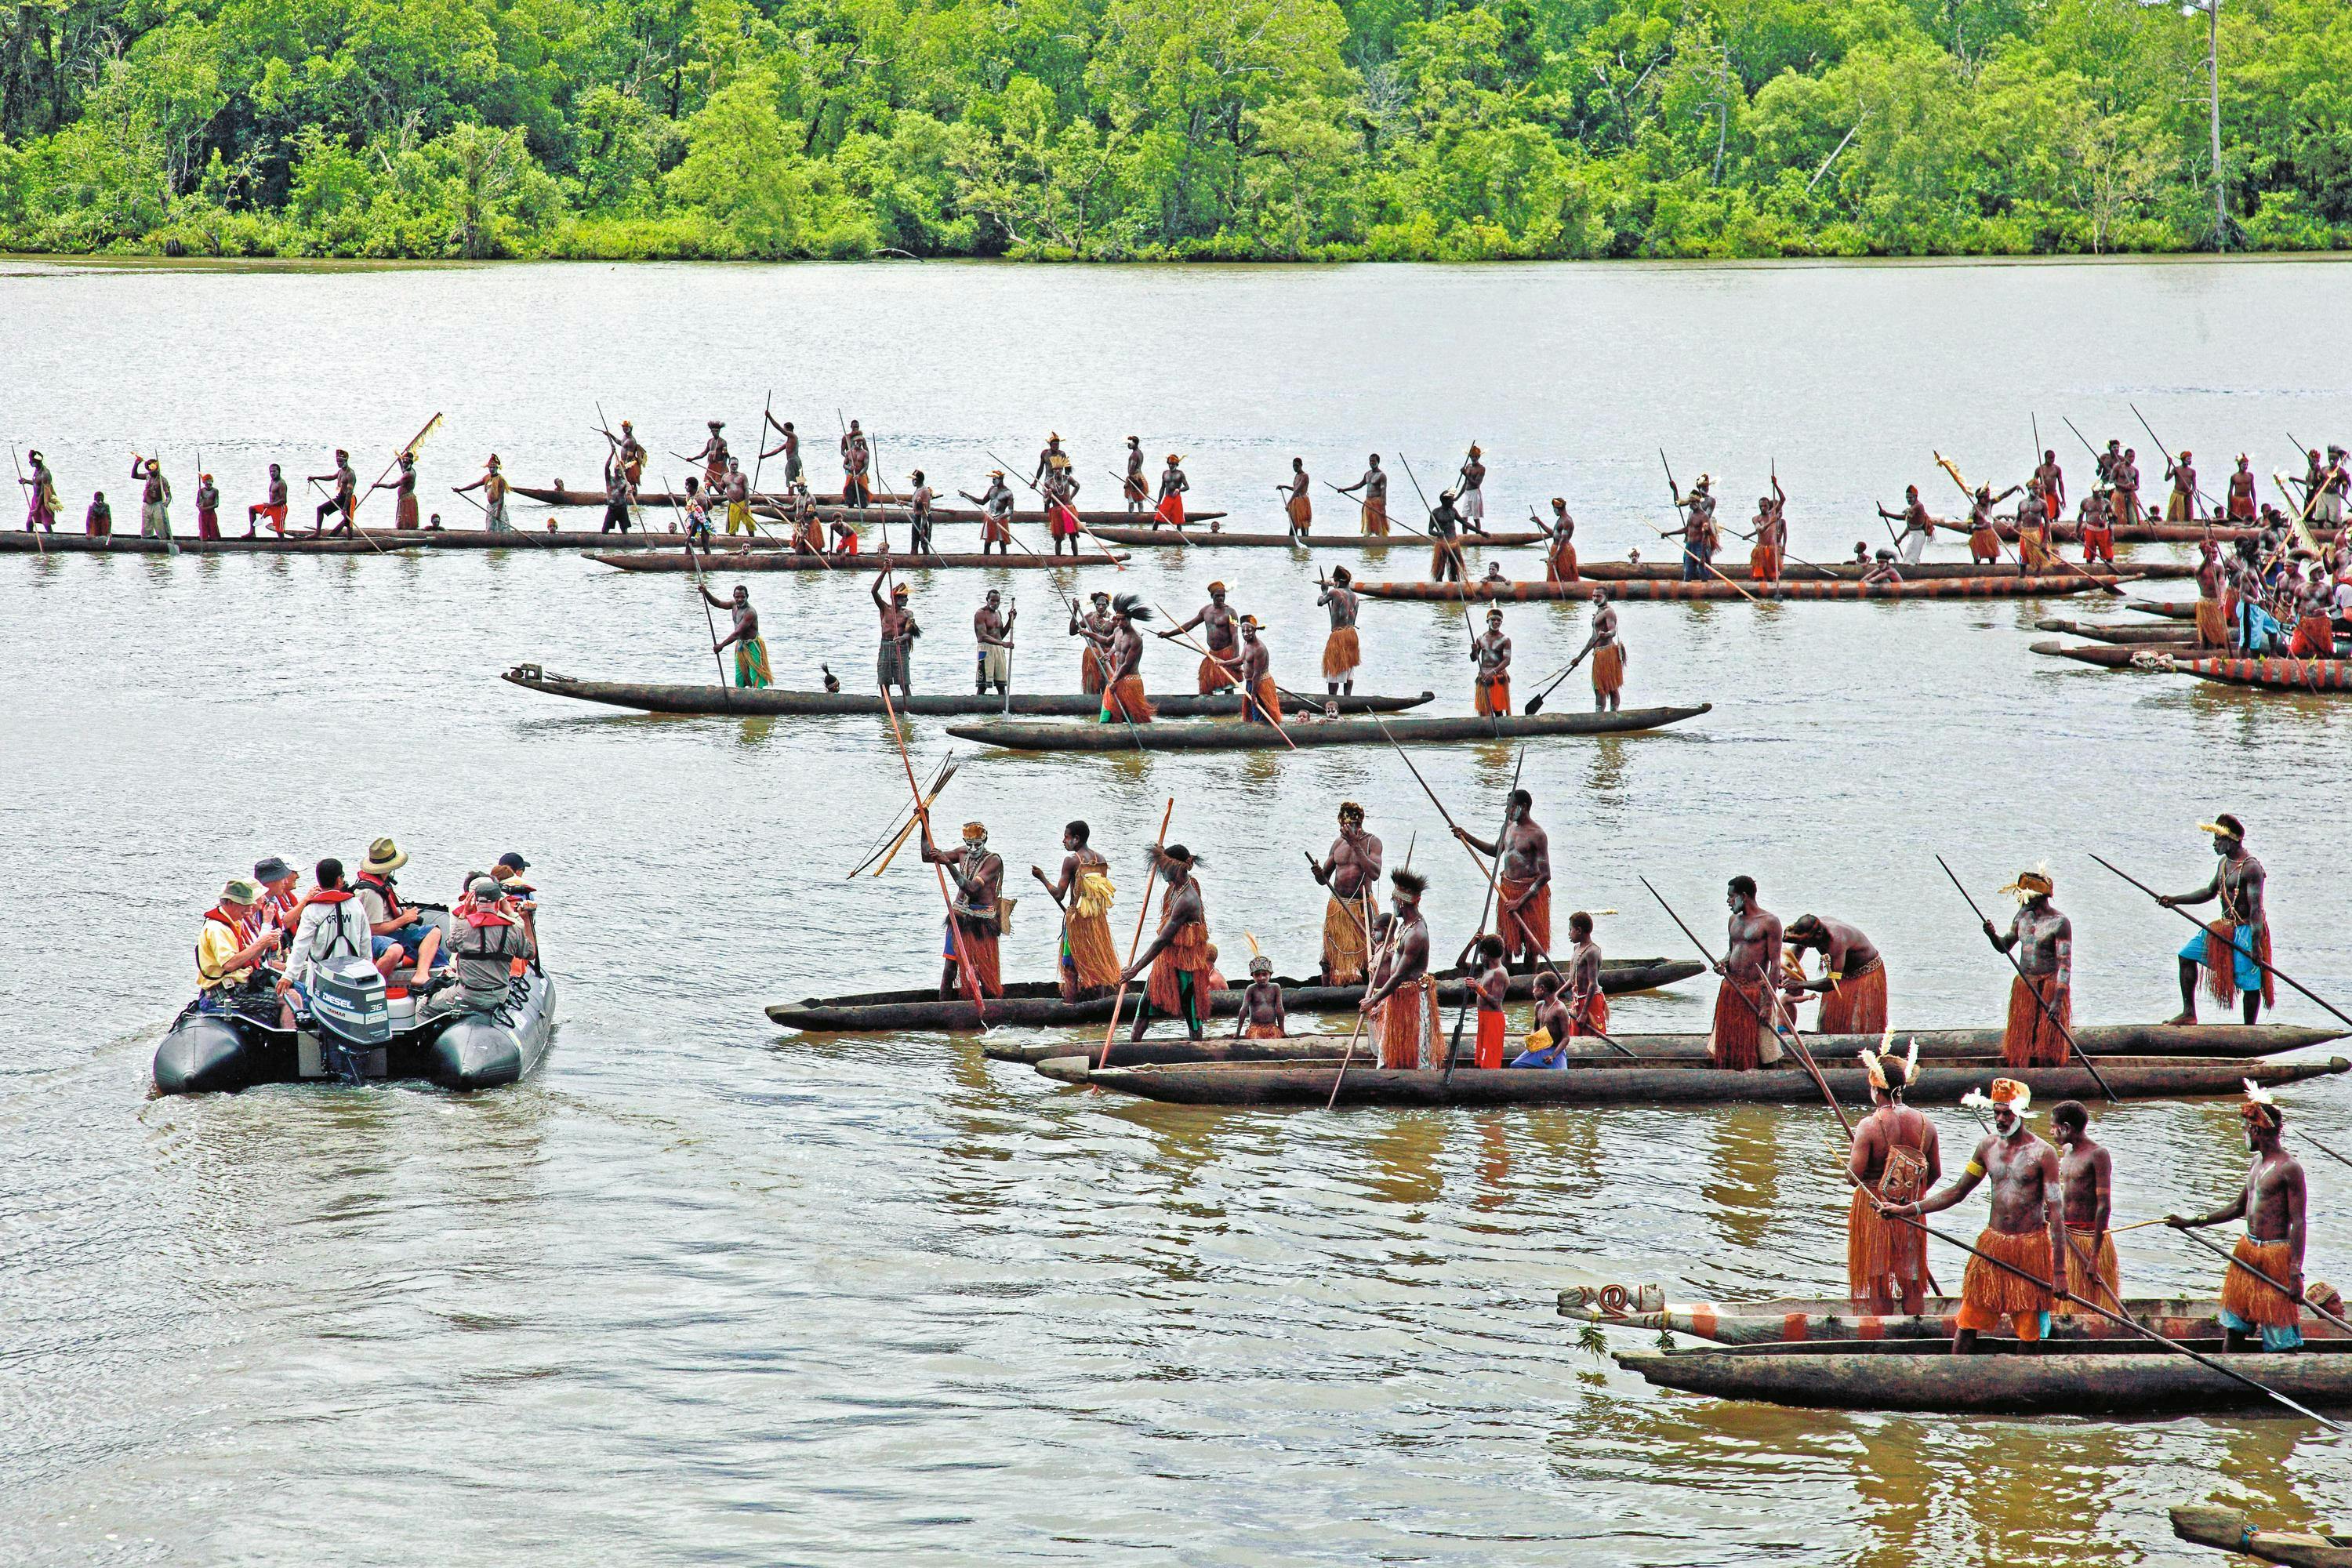 Local Asmat people demonstrate the Greeting Ceremony, for Lindblad Expedition guests, using traditional clothing and dug out canoes, Syuru Village, Papua, New Guinea Island, Indonesia..